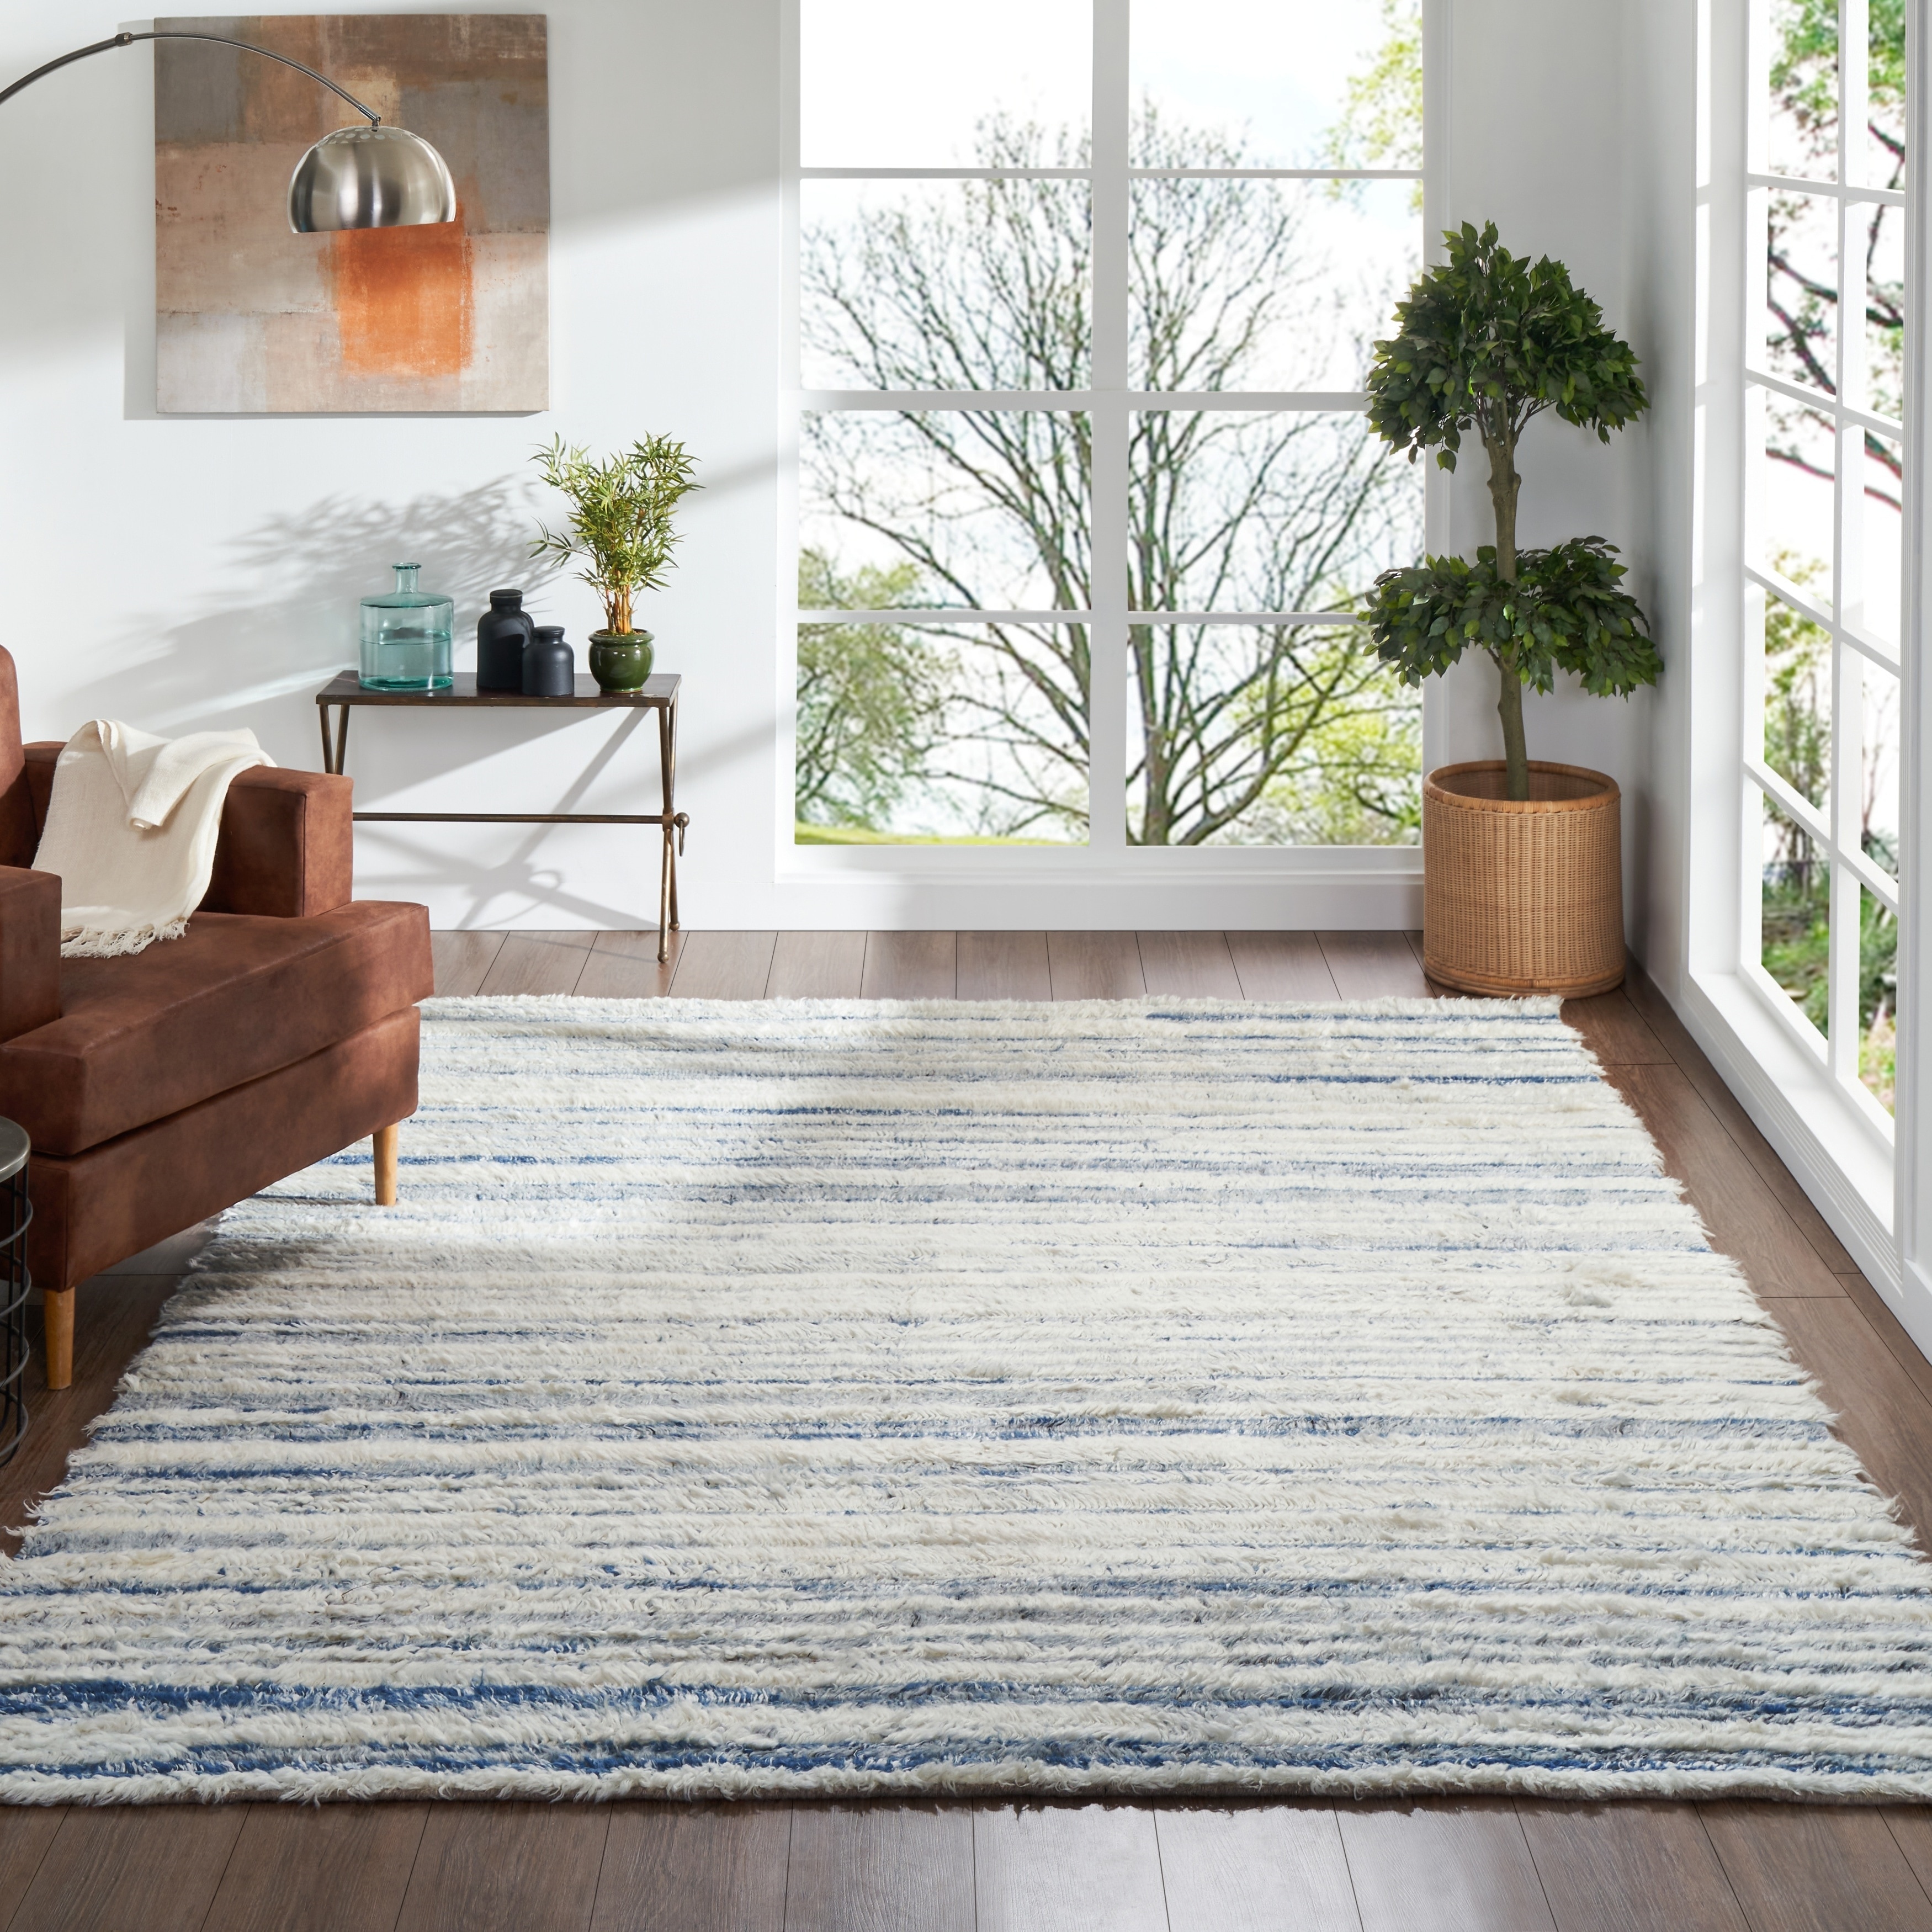 https://ak1.ostkcdn.com/images/products/is/images/direct/aeed0edde68fb0e90f57c769cf28c27a35b971d6/Abstract-Shag-Blue-White-Area-Rug.jpg